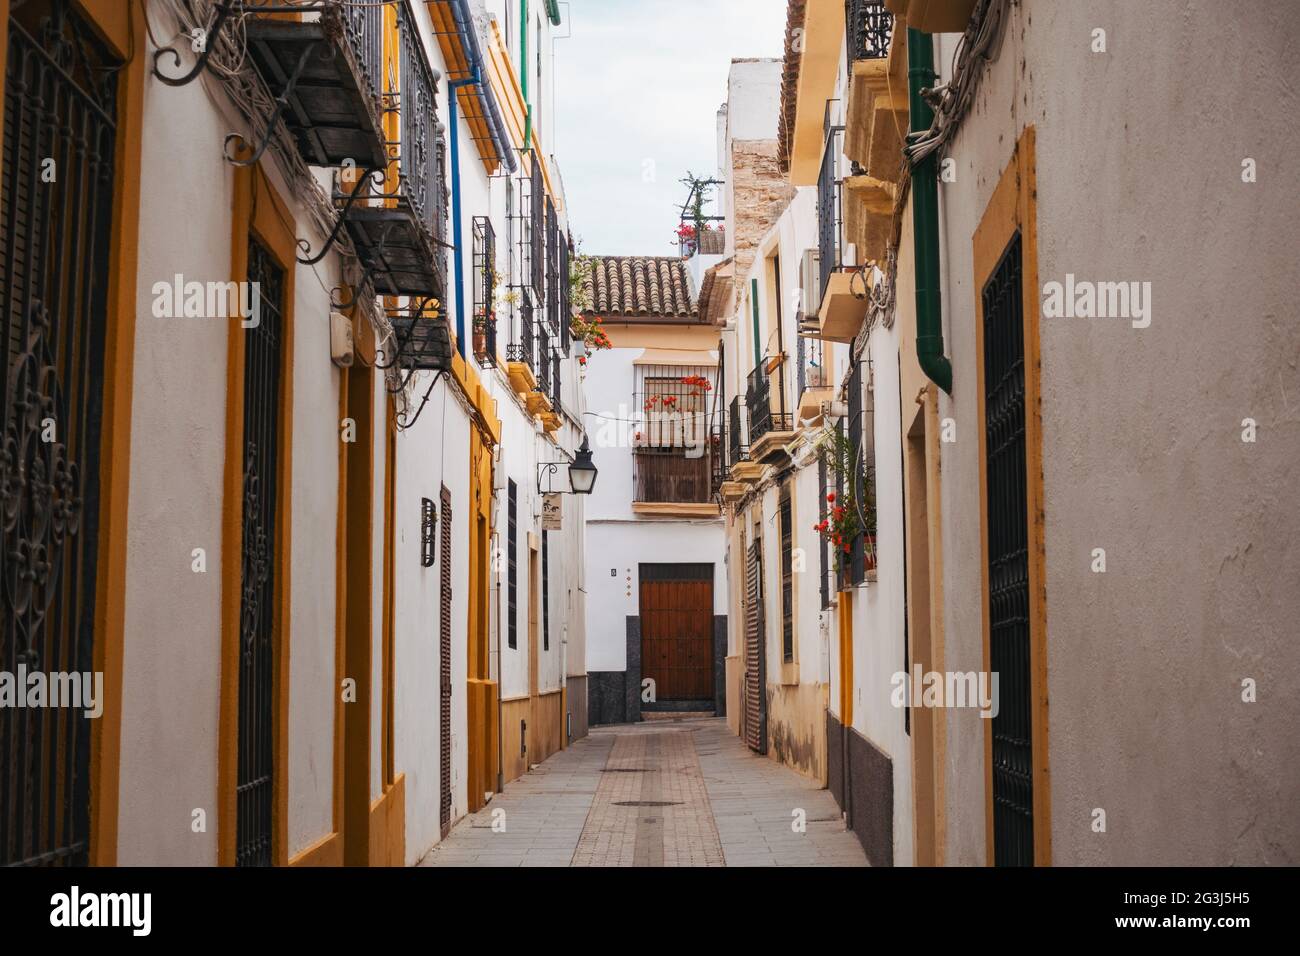 Building exteriors painted white and yellow line an empty narrow street in Córdoba, Spain Stock Photo